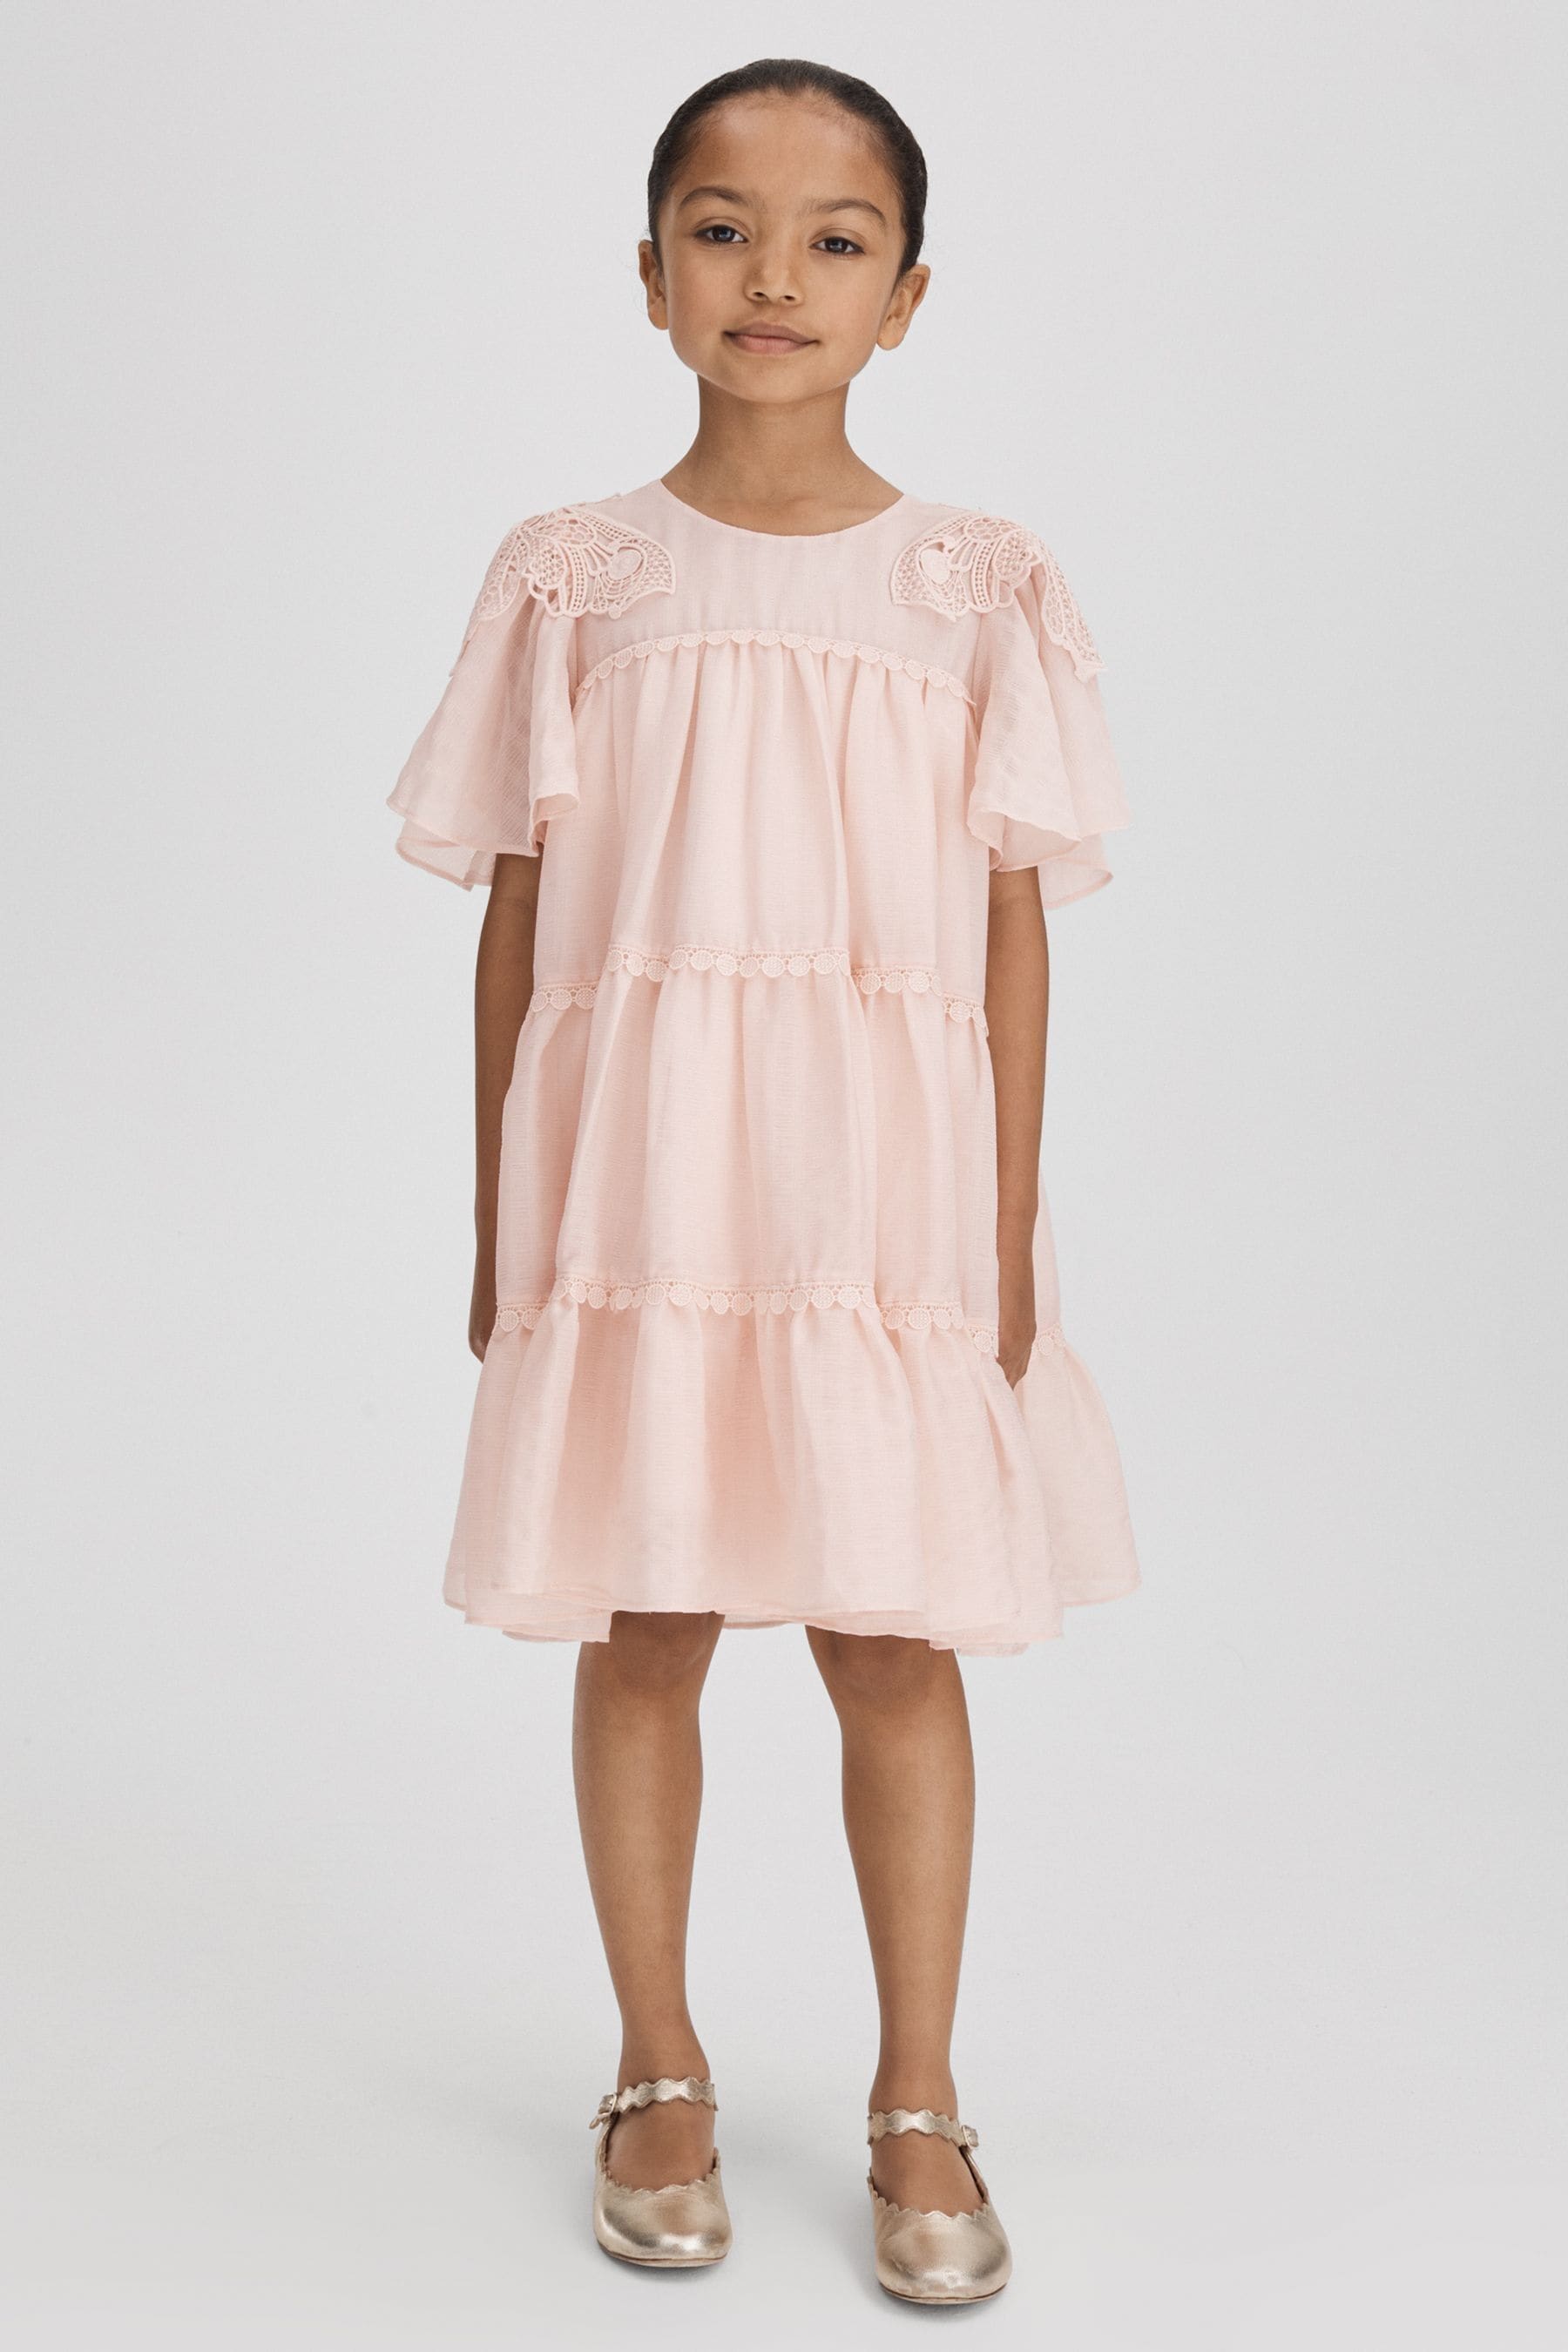 Reiss Leonie - Pink Teen Tiered Embroidered Dress, Uk 13-14 Yrs